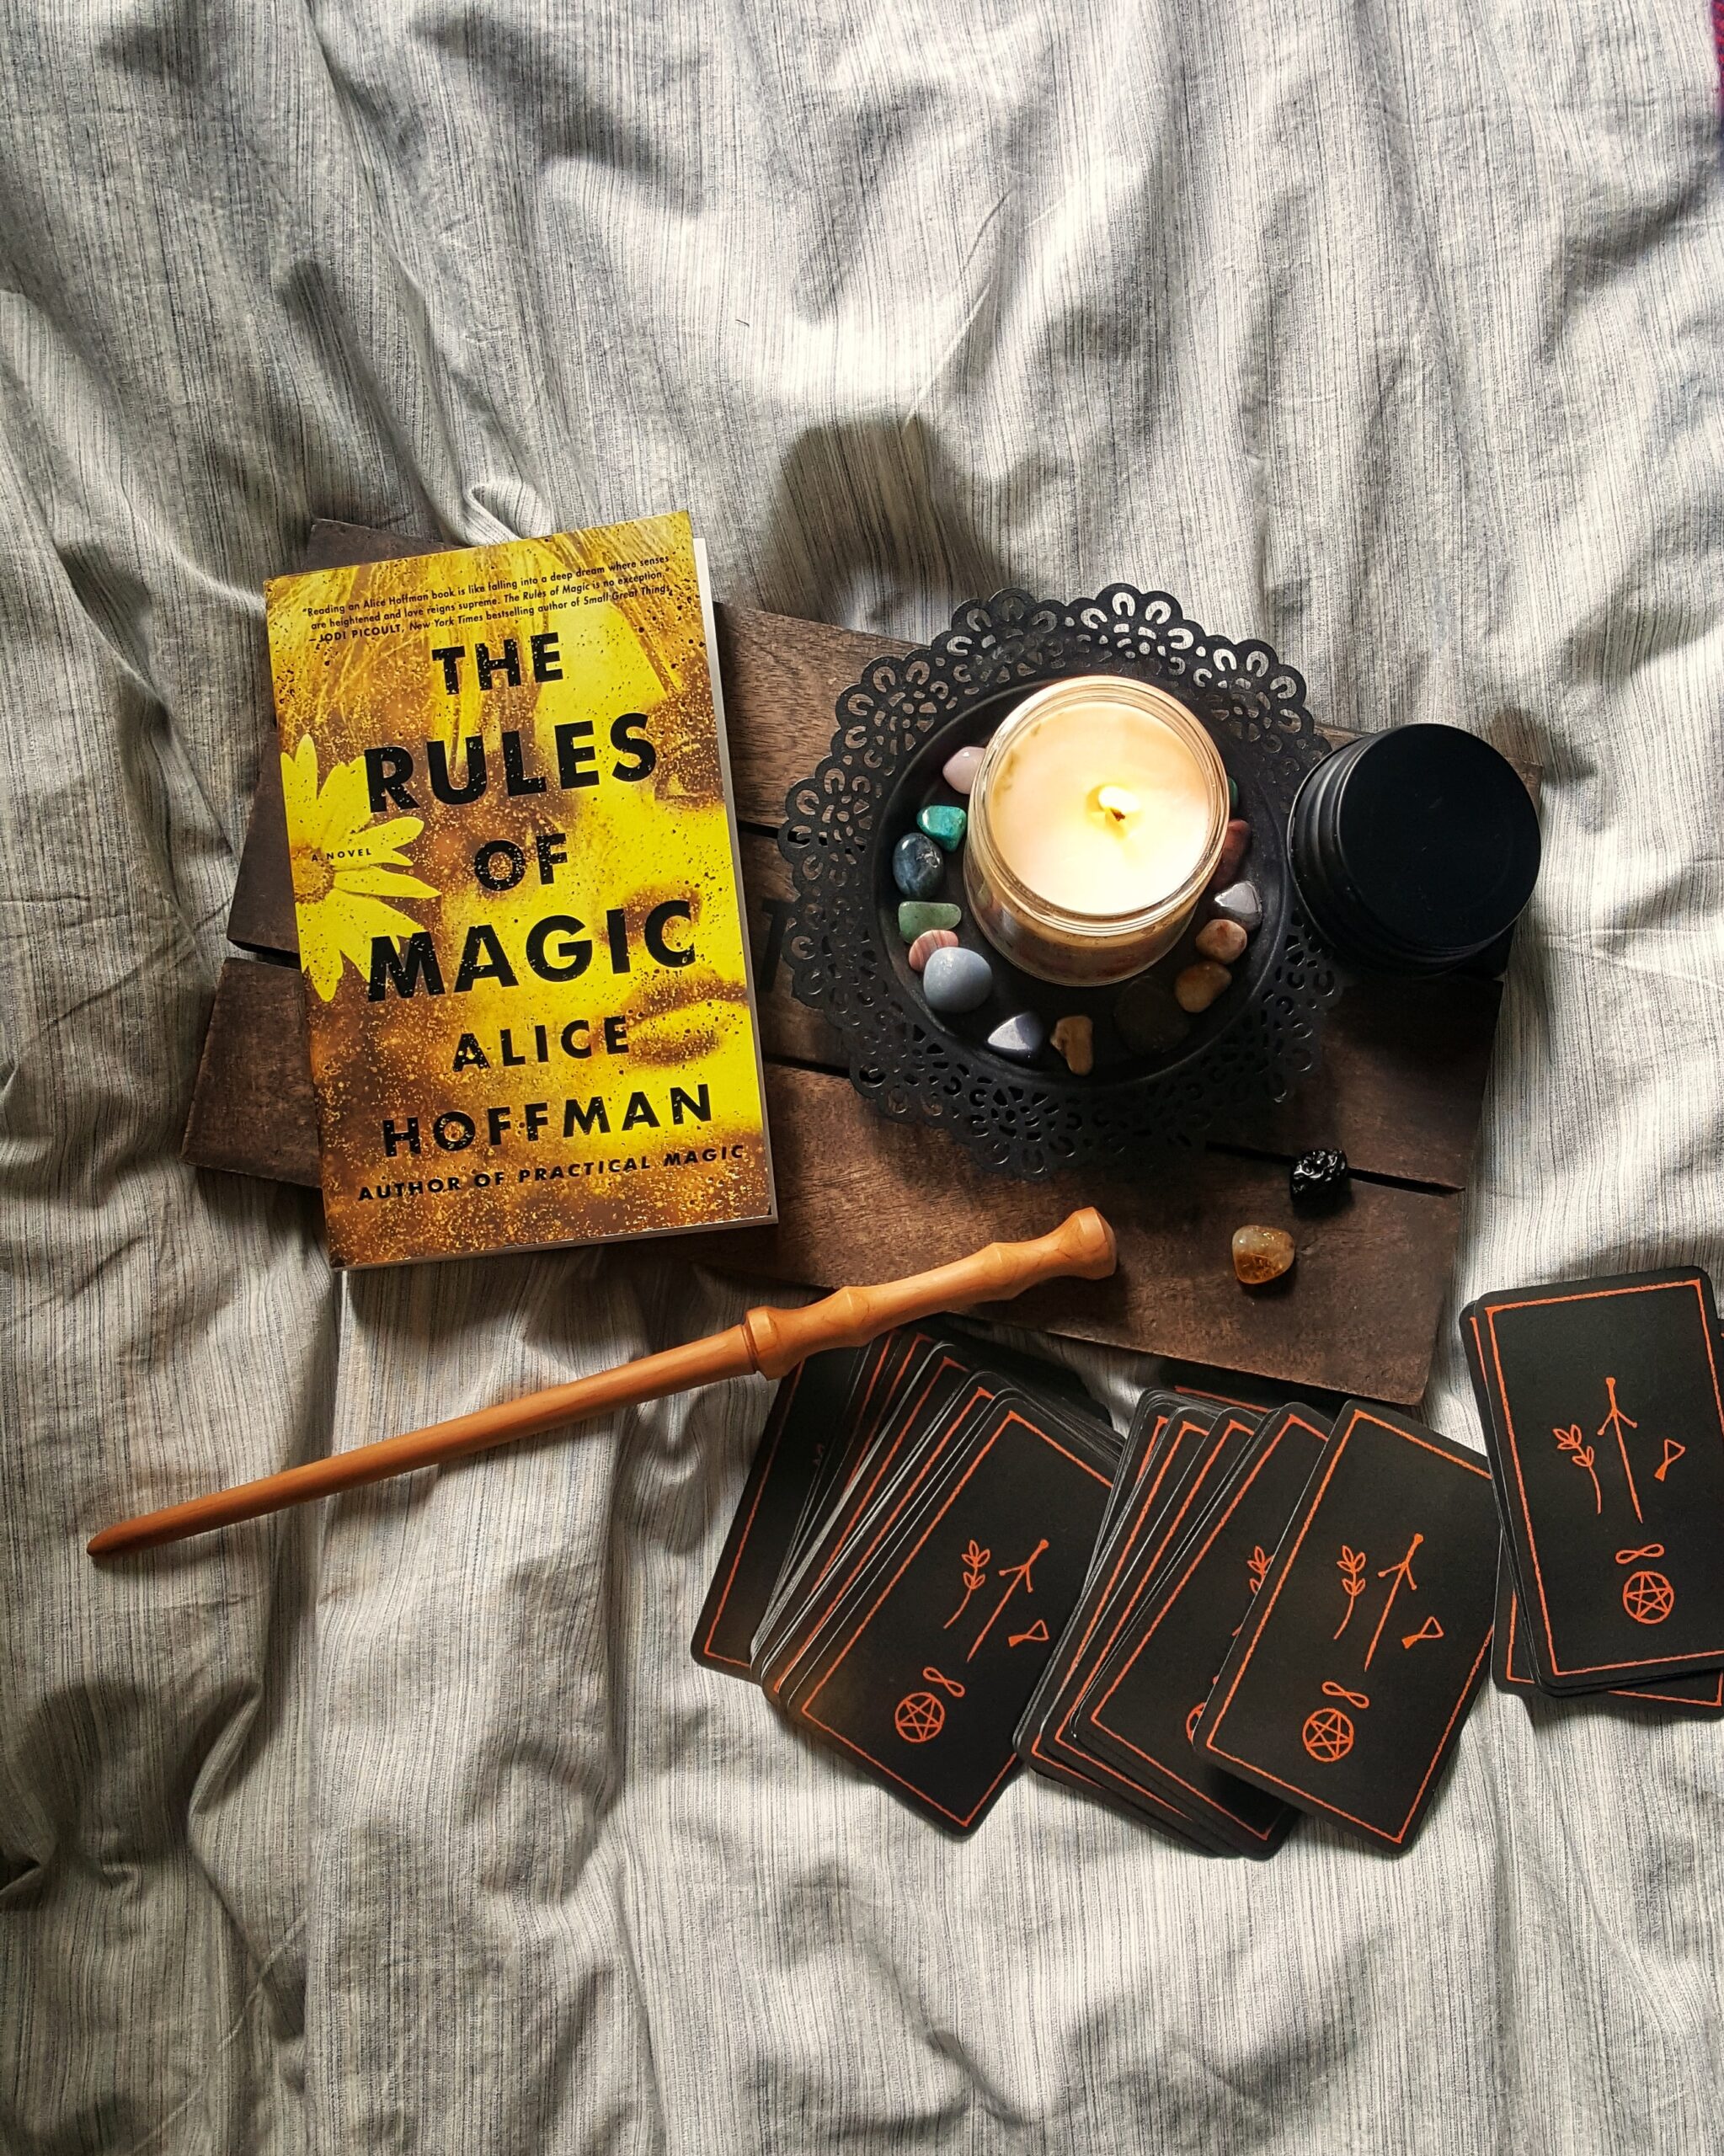 3: The Rules of Magic by Alice Hoffman